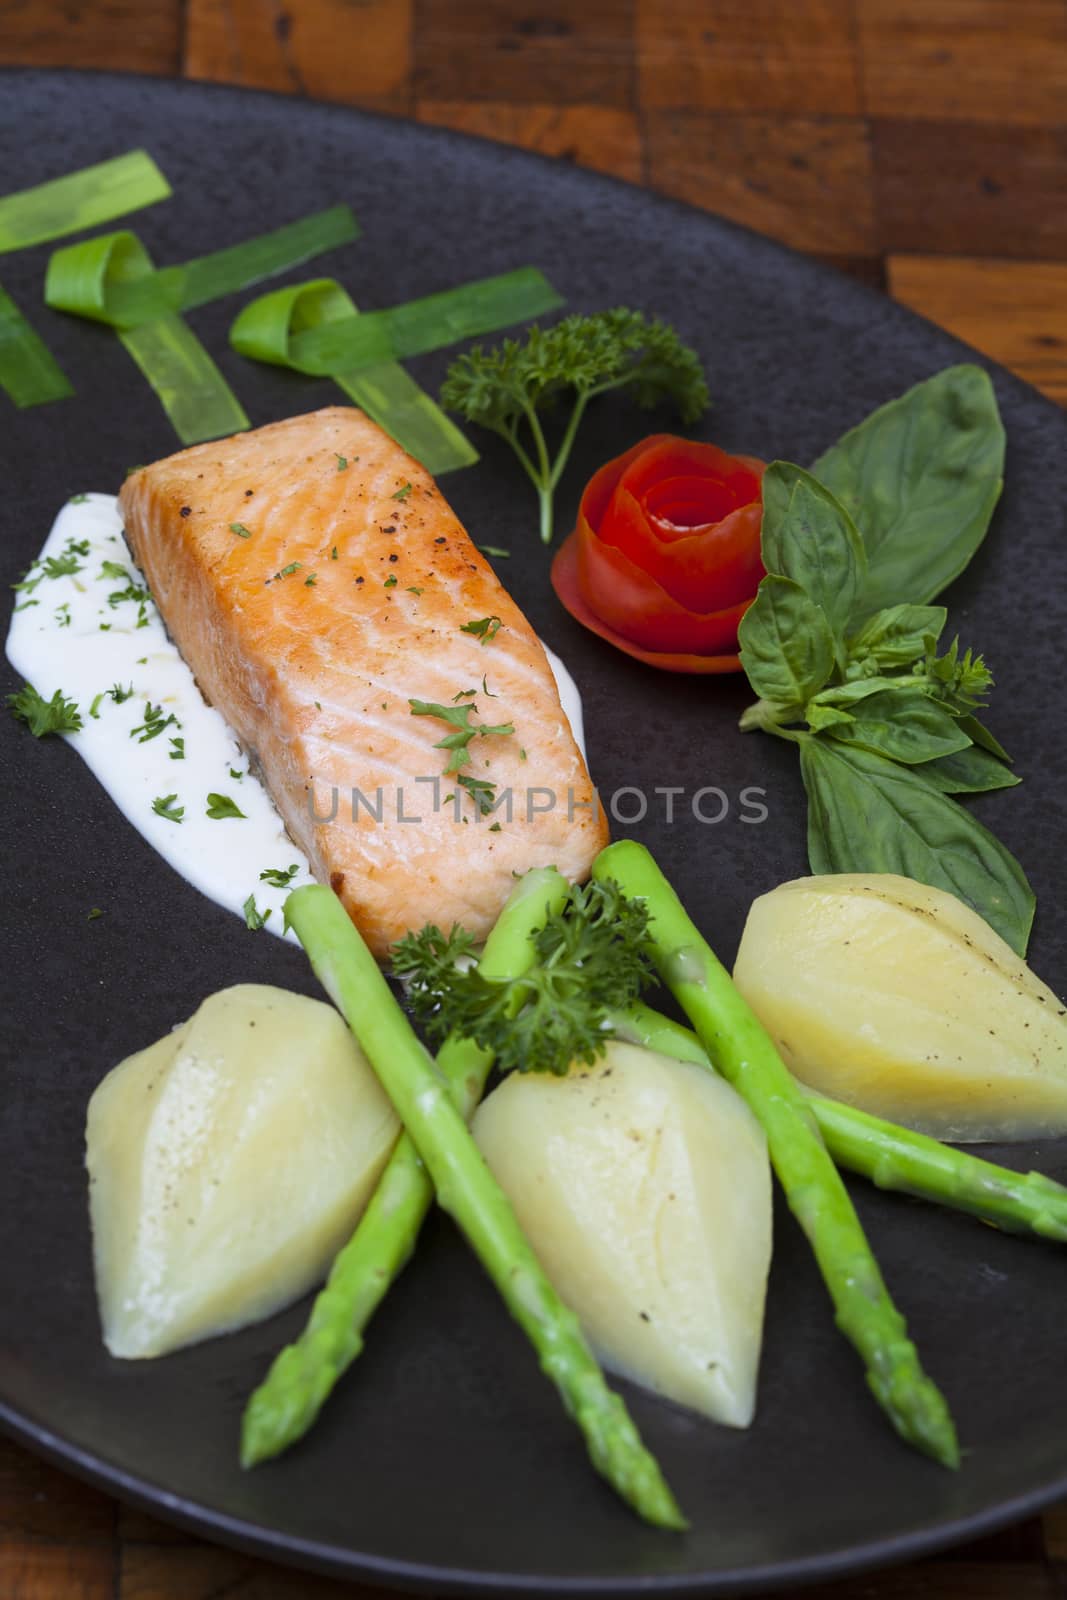 Atlantic salmon with a rocket salad,Decorated with vegetables on a black plate.